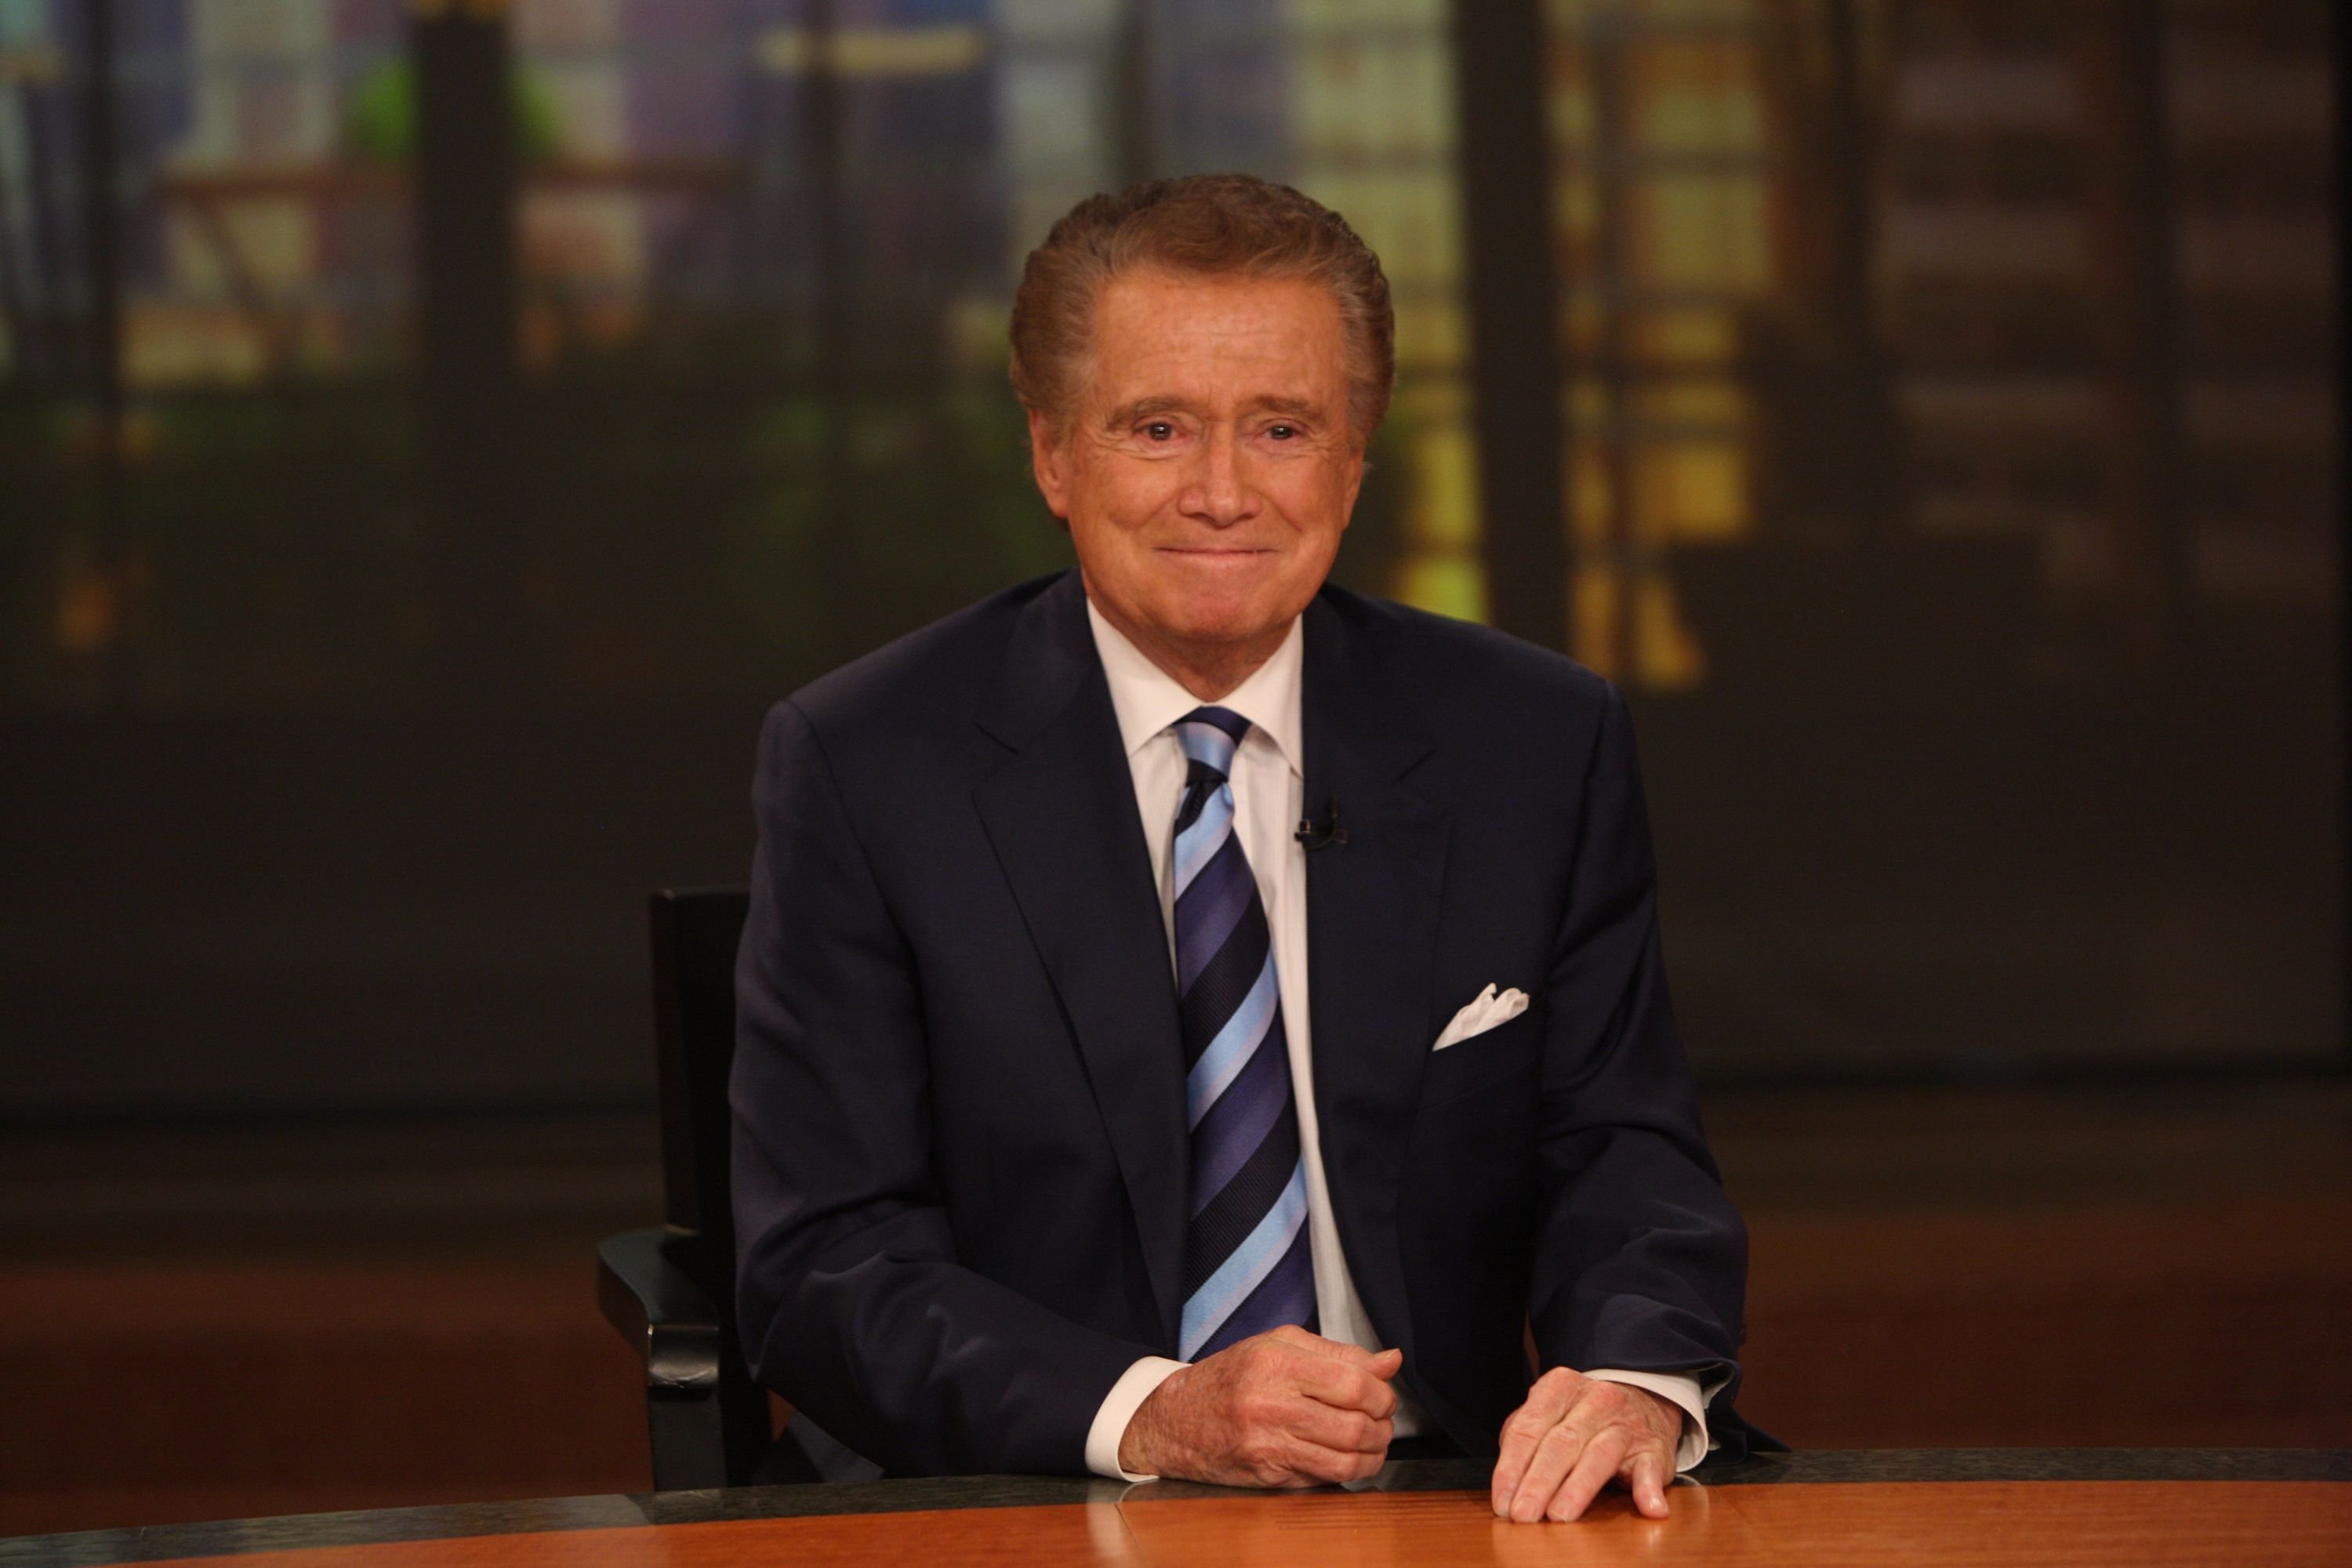 Regis Philbin at a press conference on his departure from "Live with Regis and Kelly" at ABC Studios, in New York City  on November 17, 2011 | Photo: Getty Images